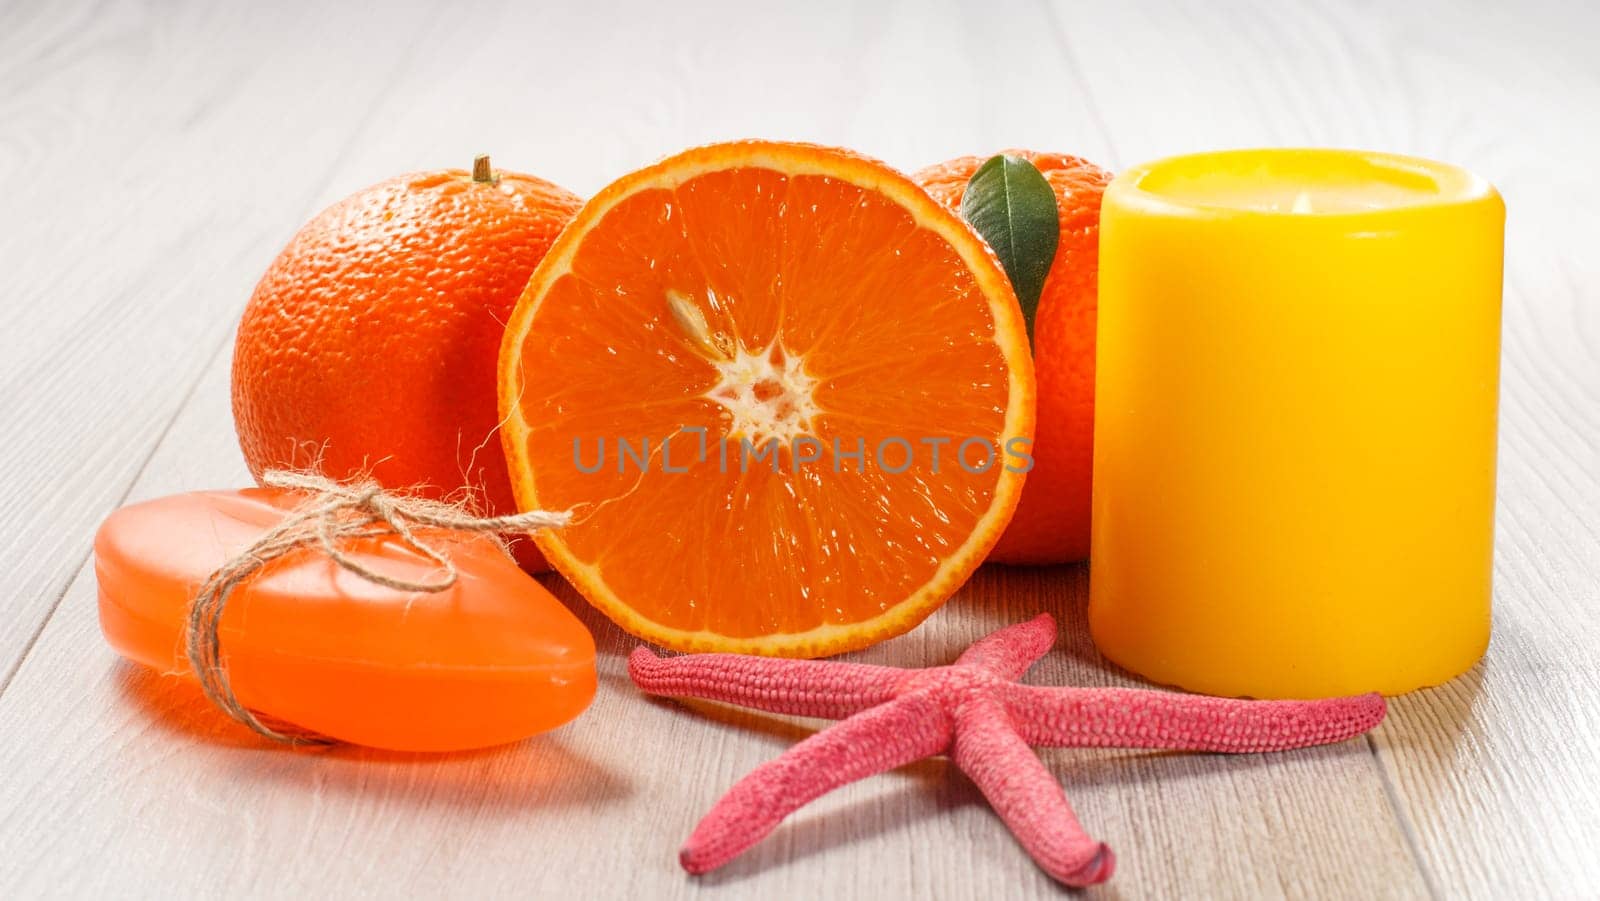 Cut orange with two whole oranges, soap, starfish and burning candle. by mvg6894